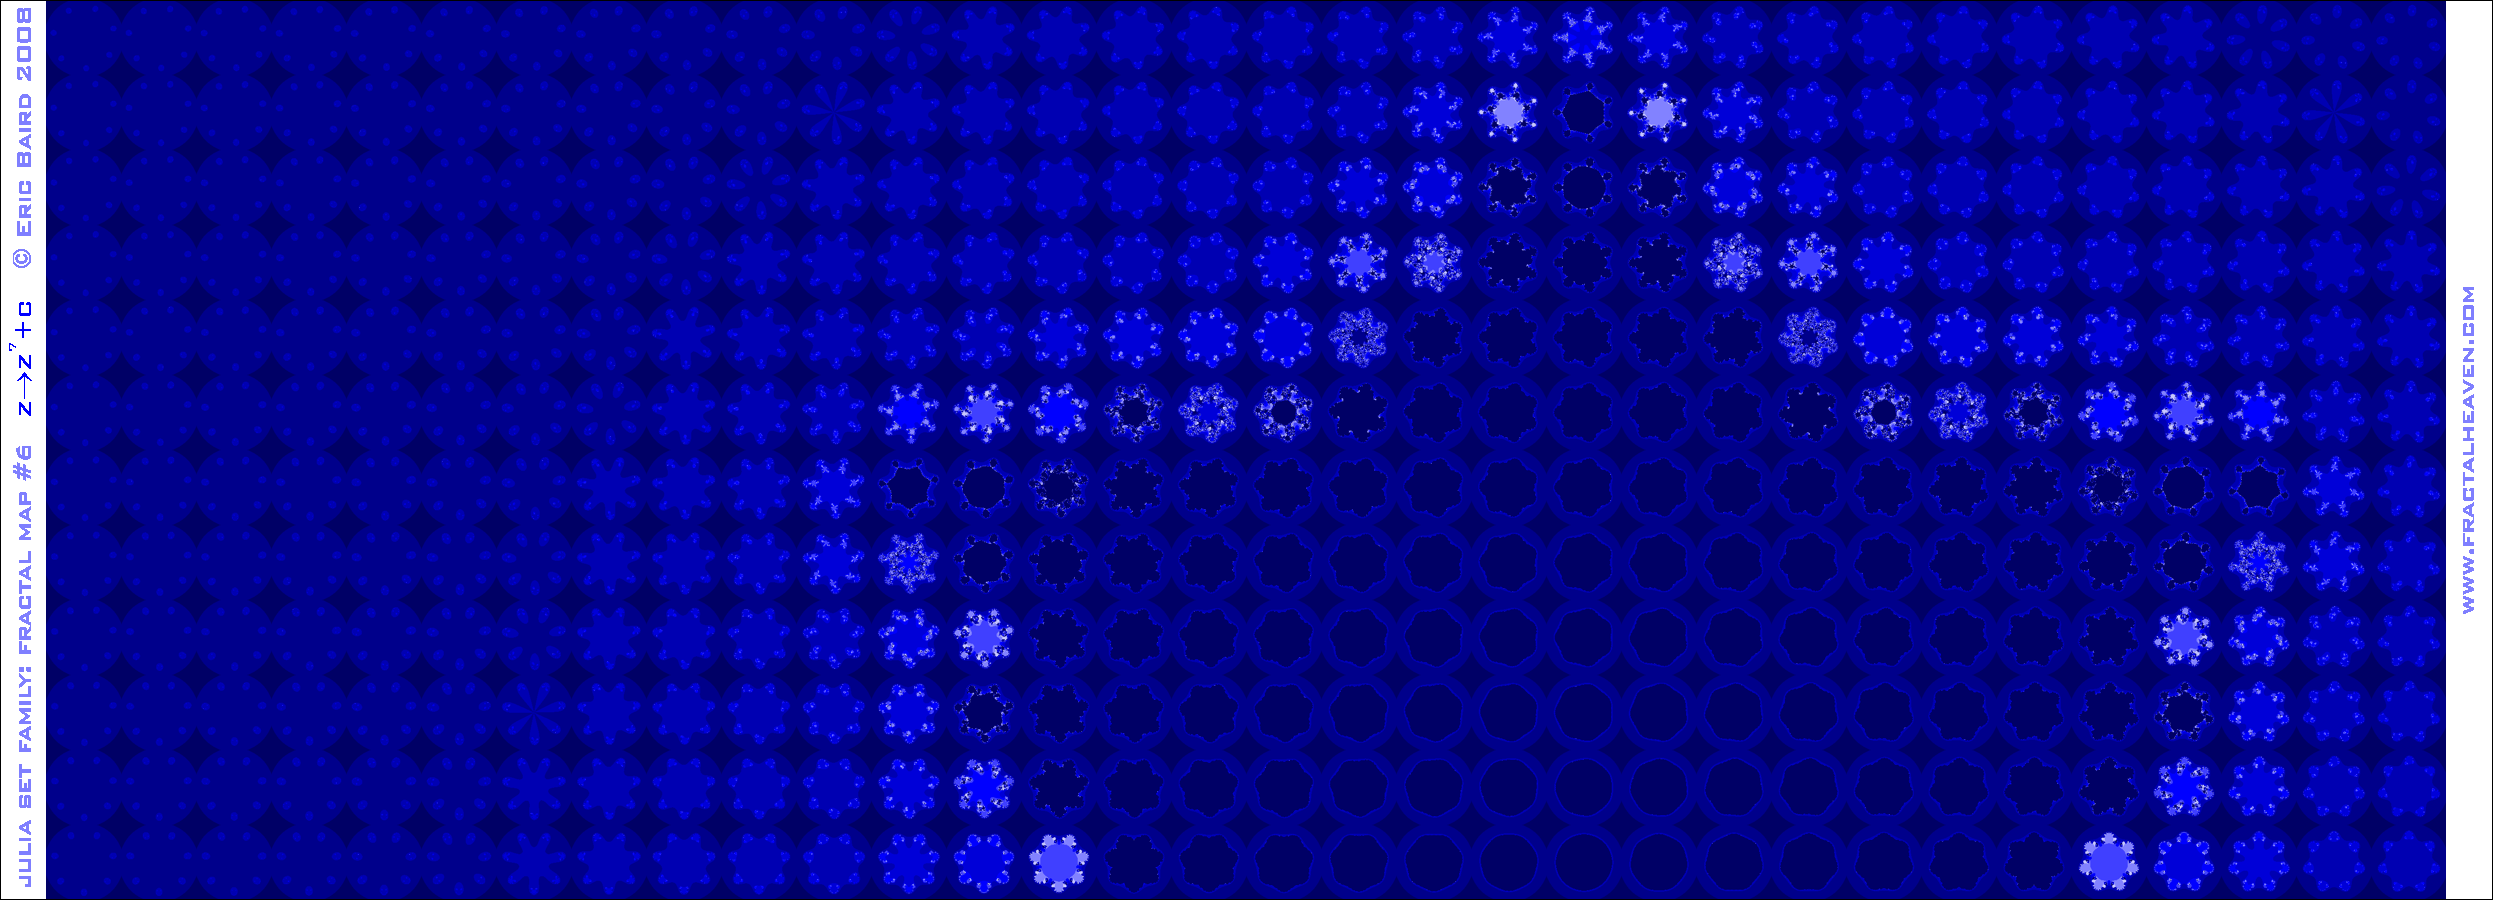 table-array of Julia Set fractal images, for z raised to the seventh power, in deep blue